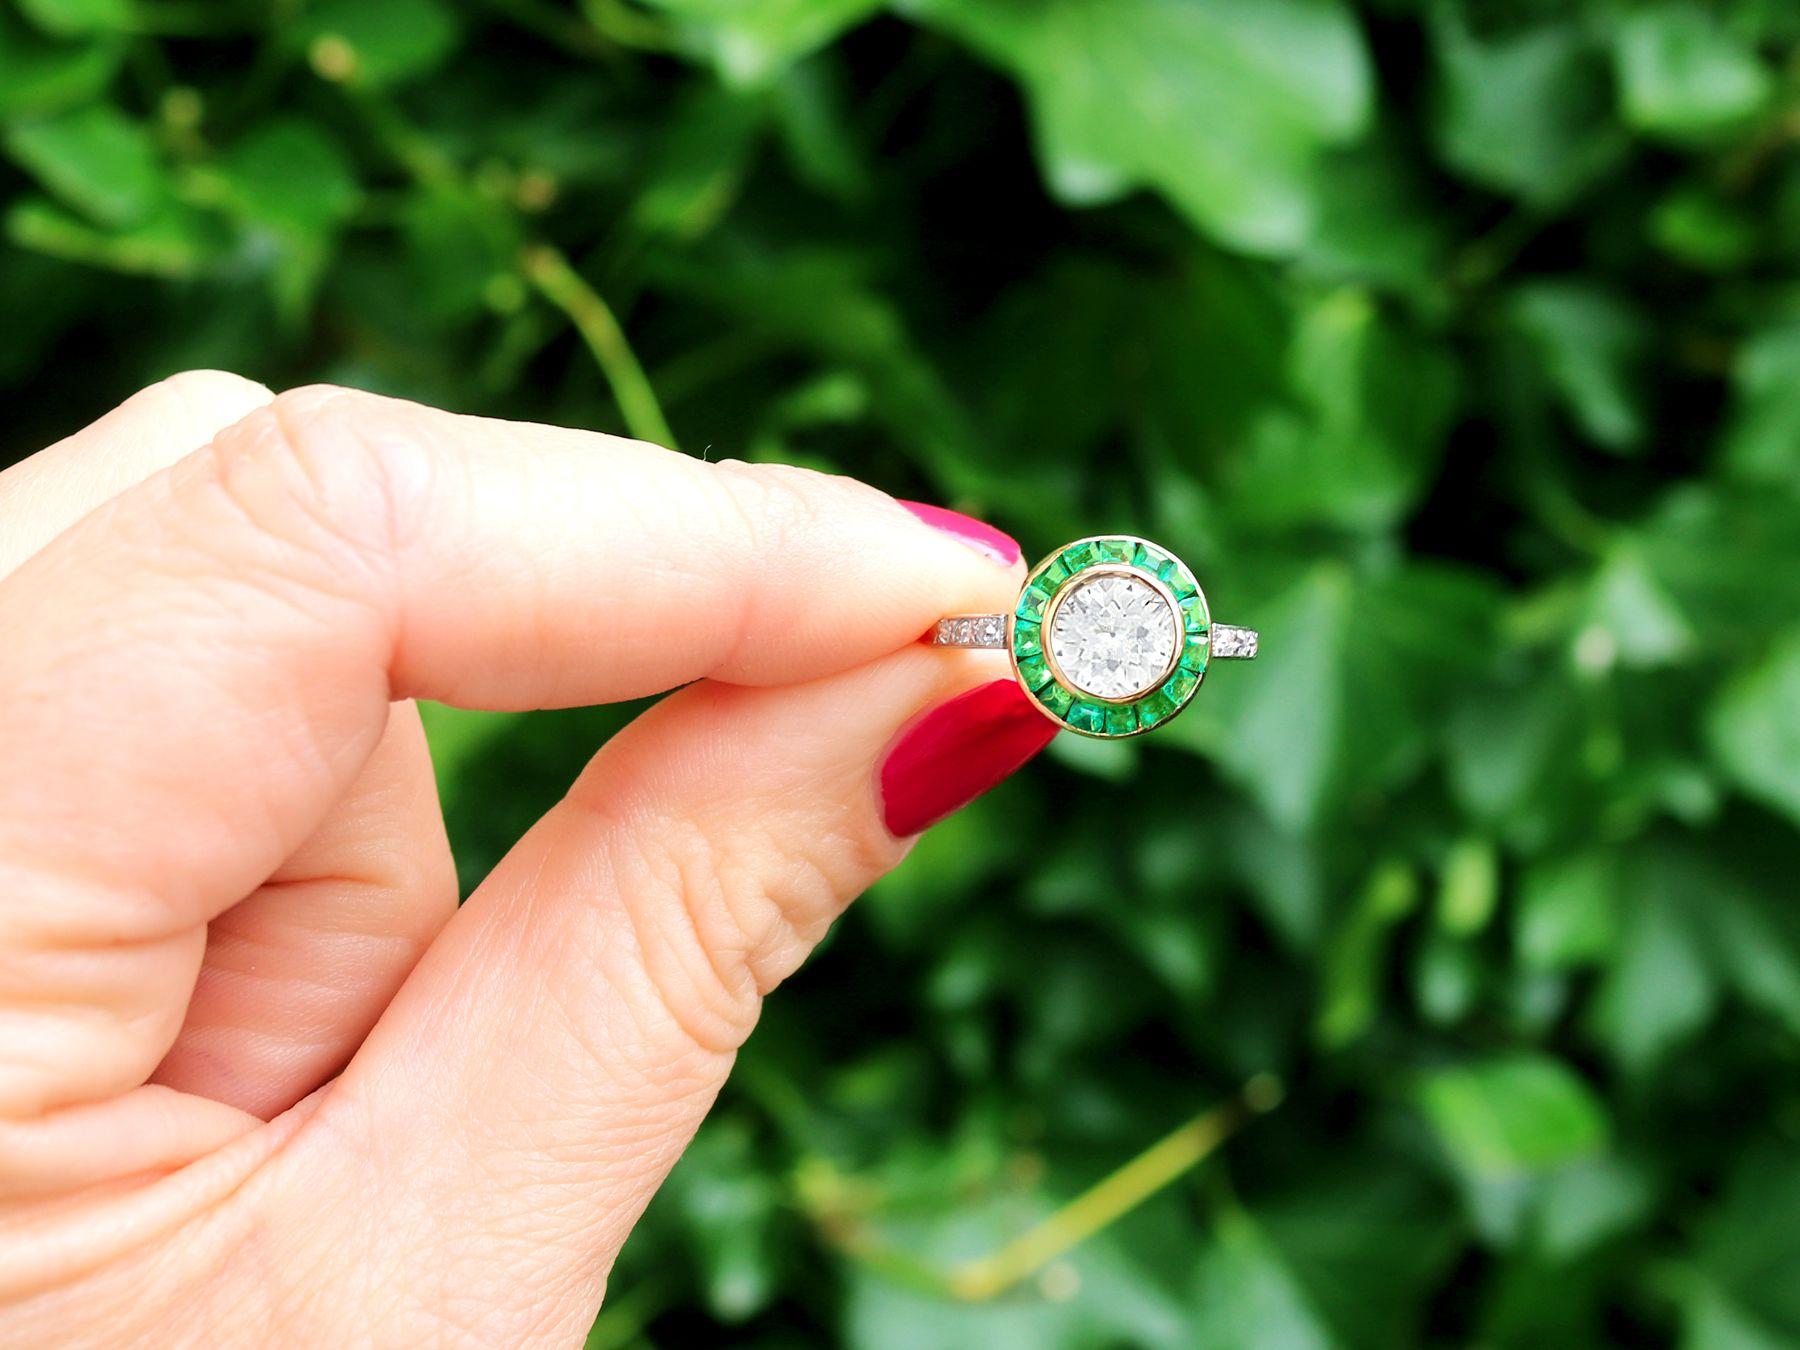 A stunning antique 1930s 1.05 Carat emerald and 1.18 Carat diamond, 18 karat yellow and platinum dress ring; part of our diverse antique jewelry and estate jewelry collections.

This stunning, fine and impressive antique emerald ring has been